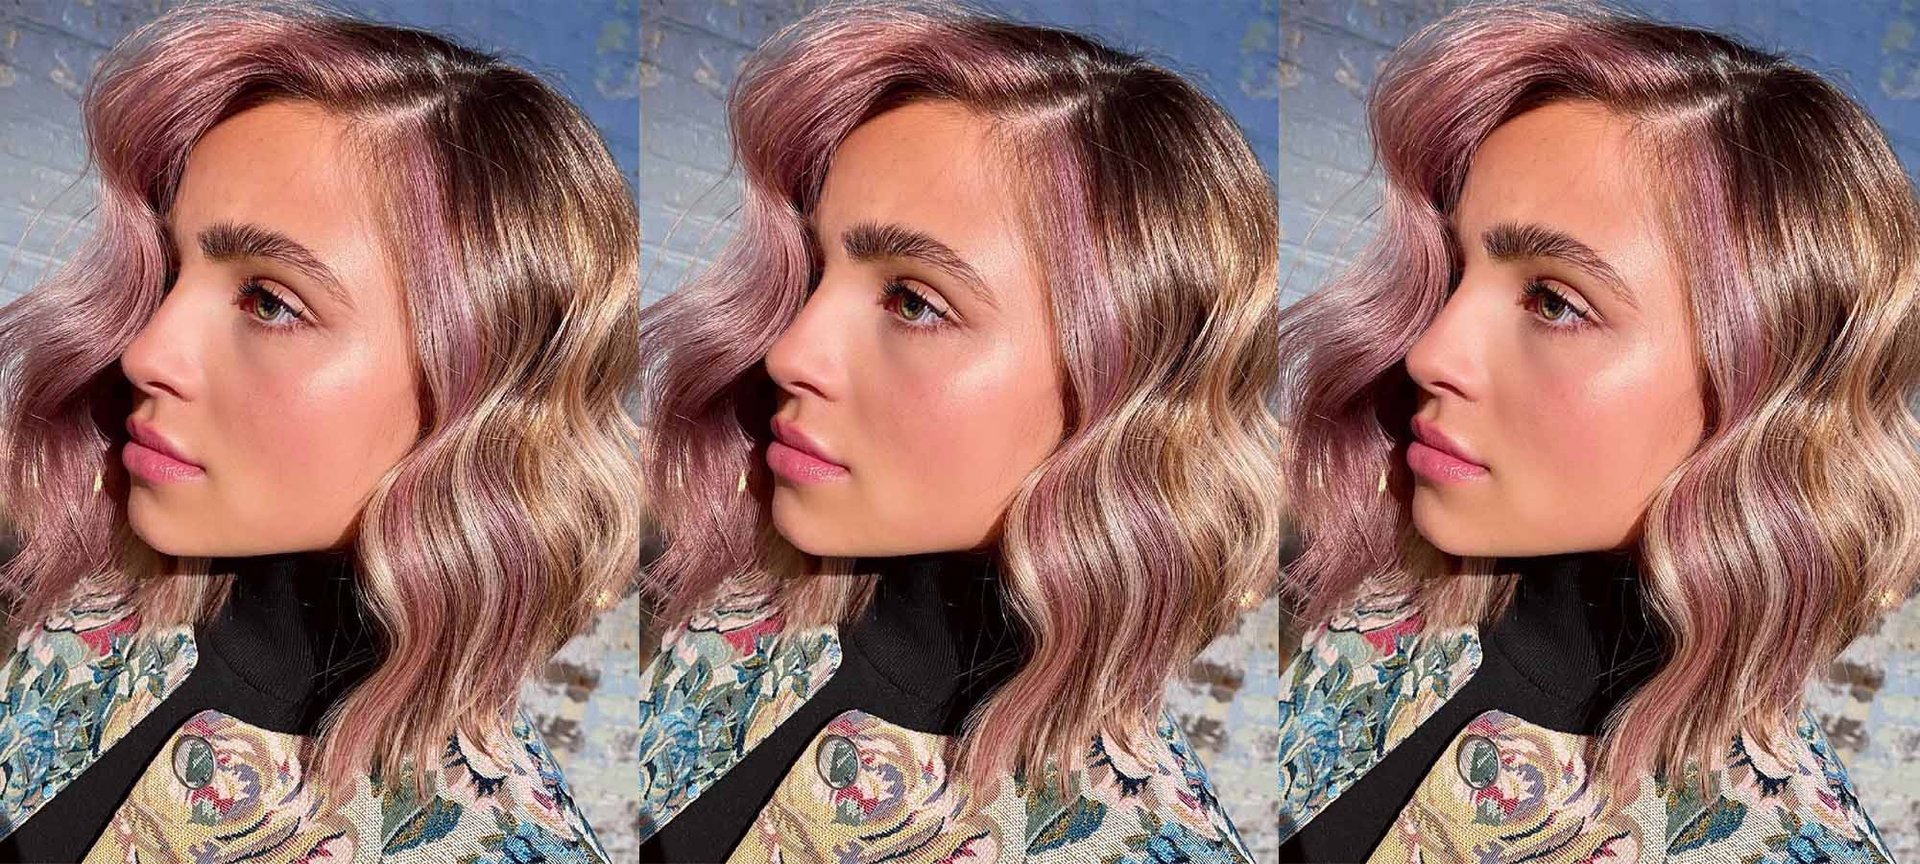 Copper, Bronze and Rose Gold Hair For Every Skin Tone - L'Oréal Paris